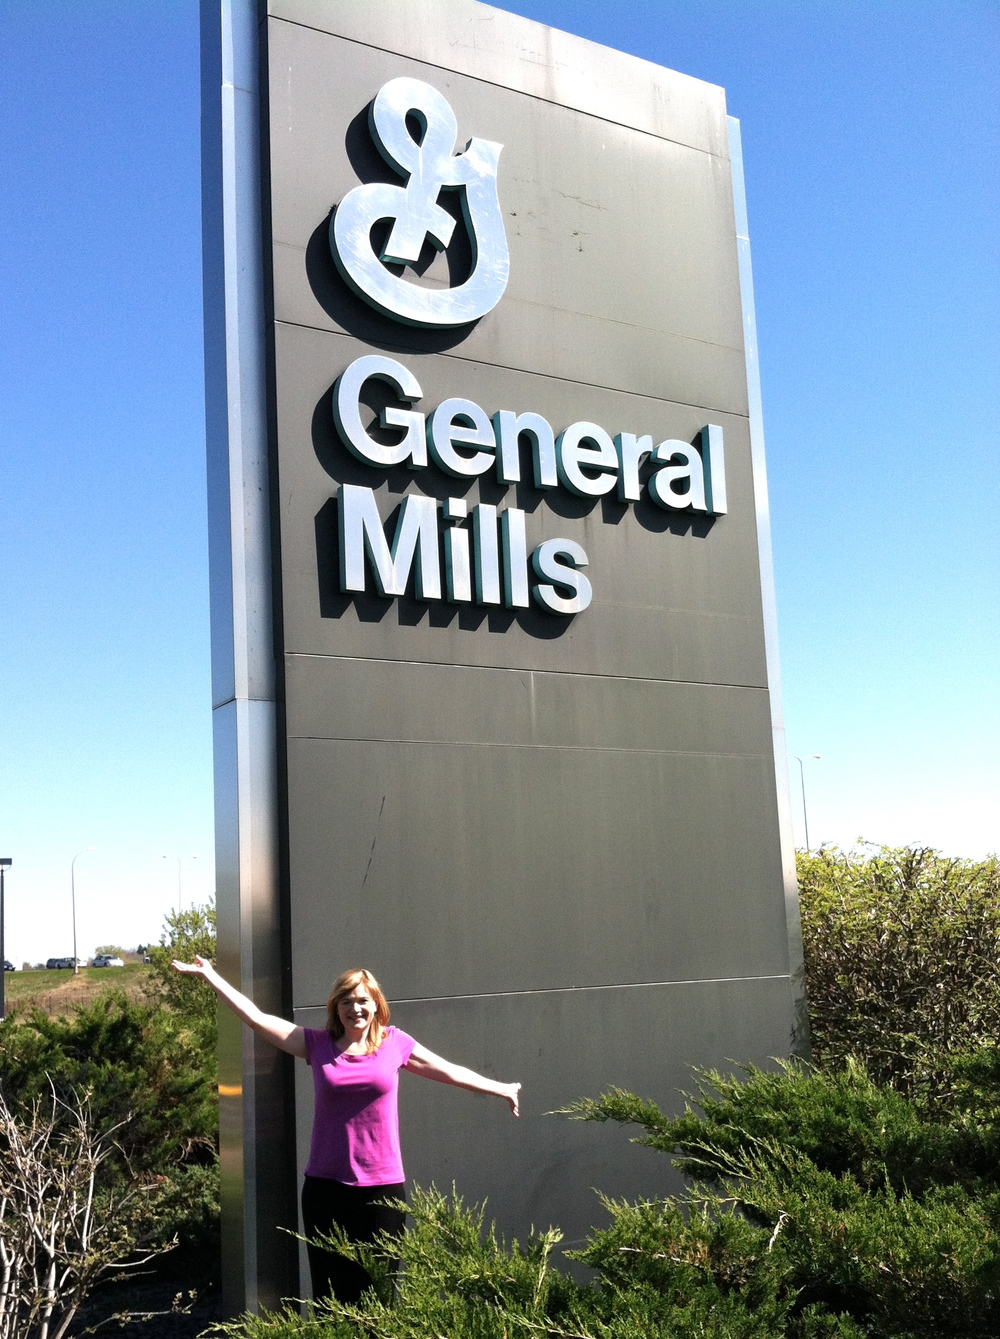  We had a great visit to General Mills in MN after the Bake-Off! 